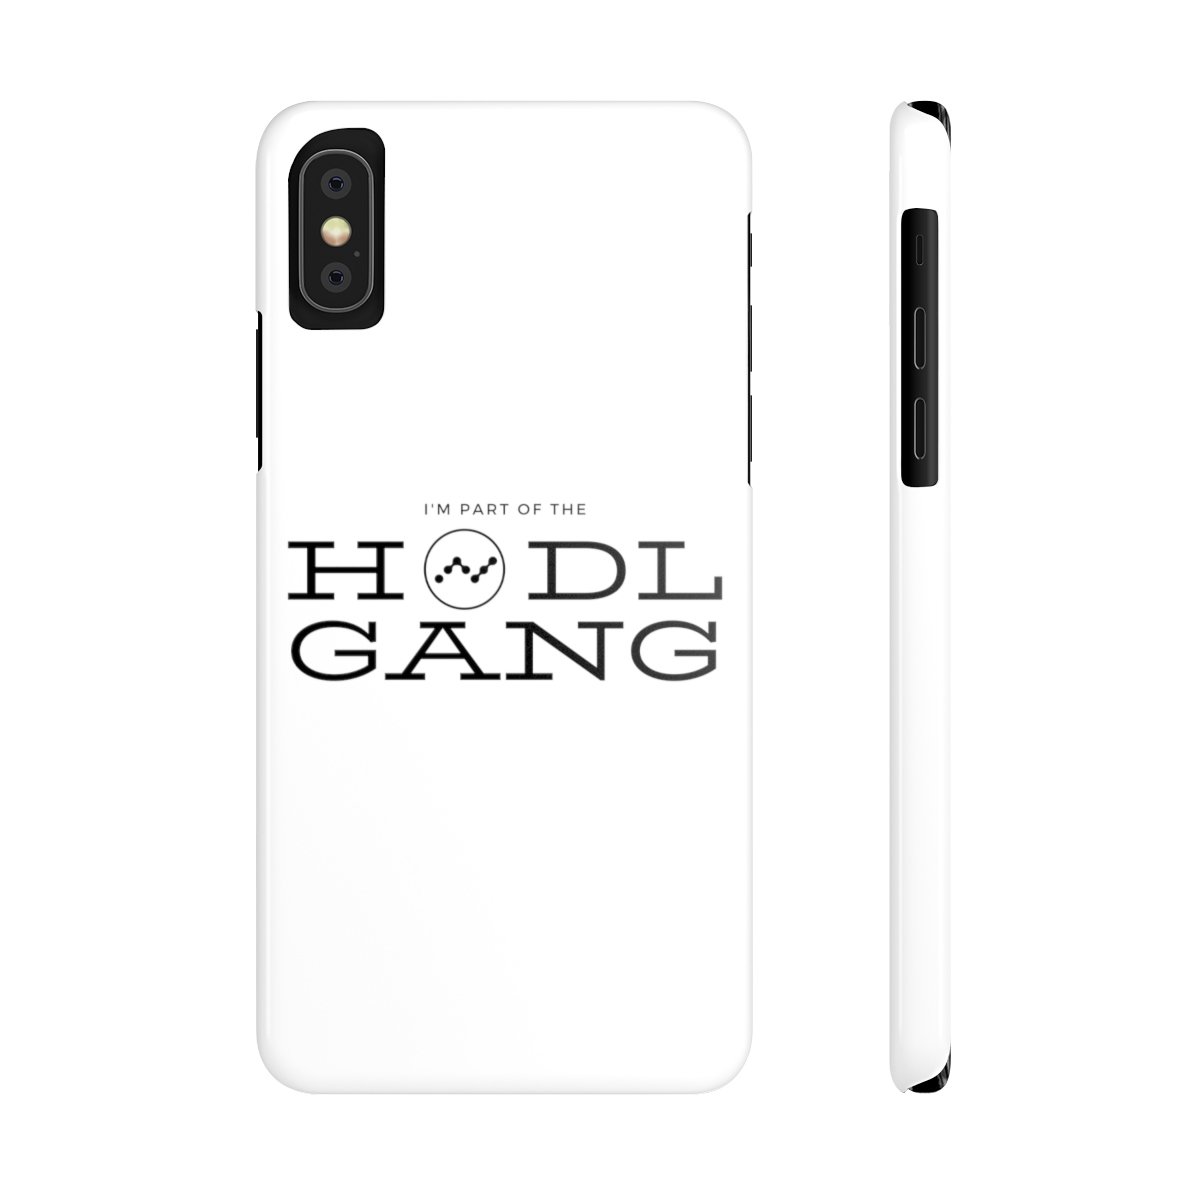 Hodl gang (Nano) - Case Mate Slim Phone Cases TCP1607 iPhone XS Official Crypto  Merch